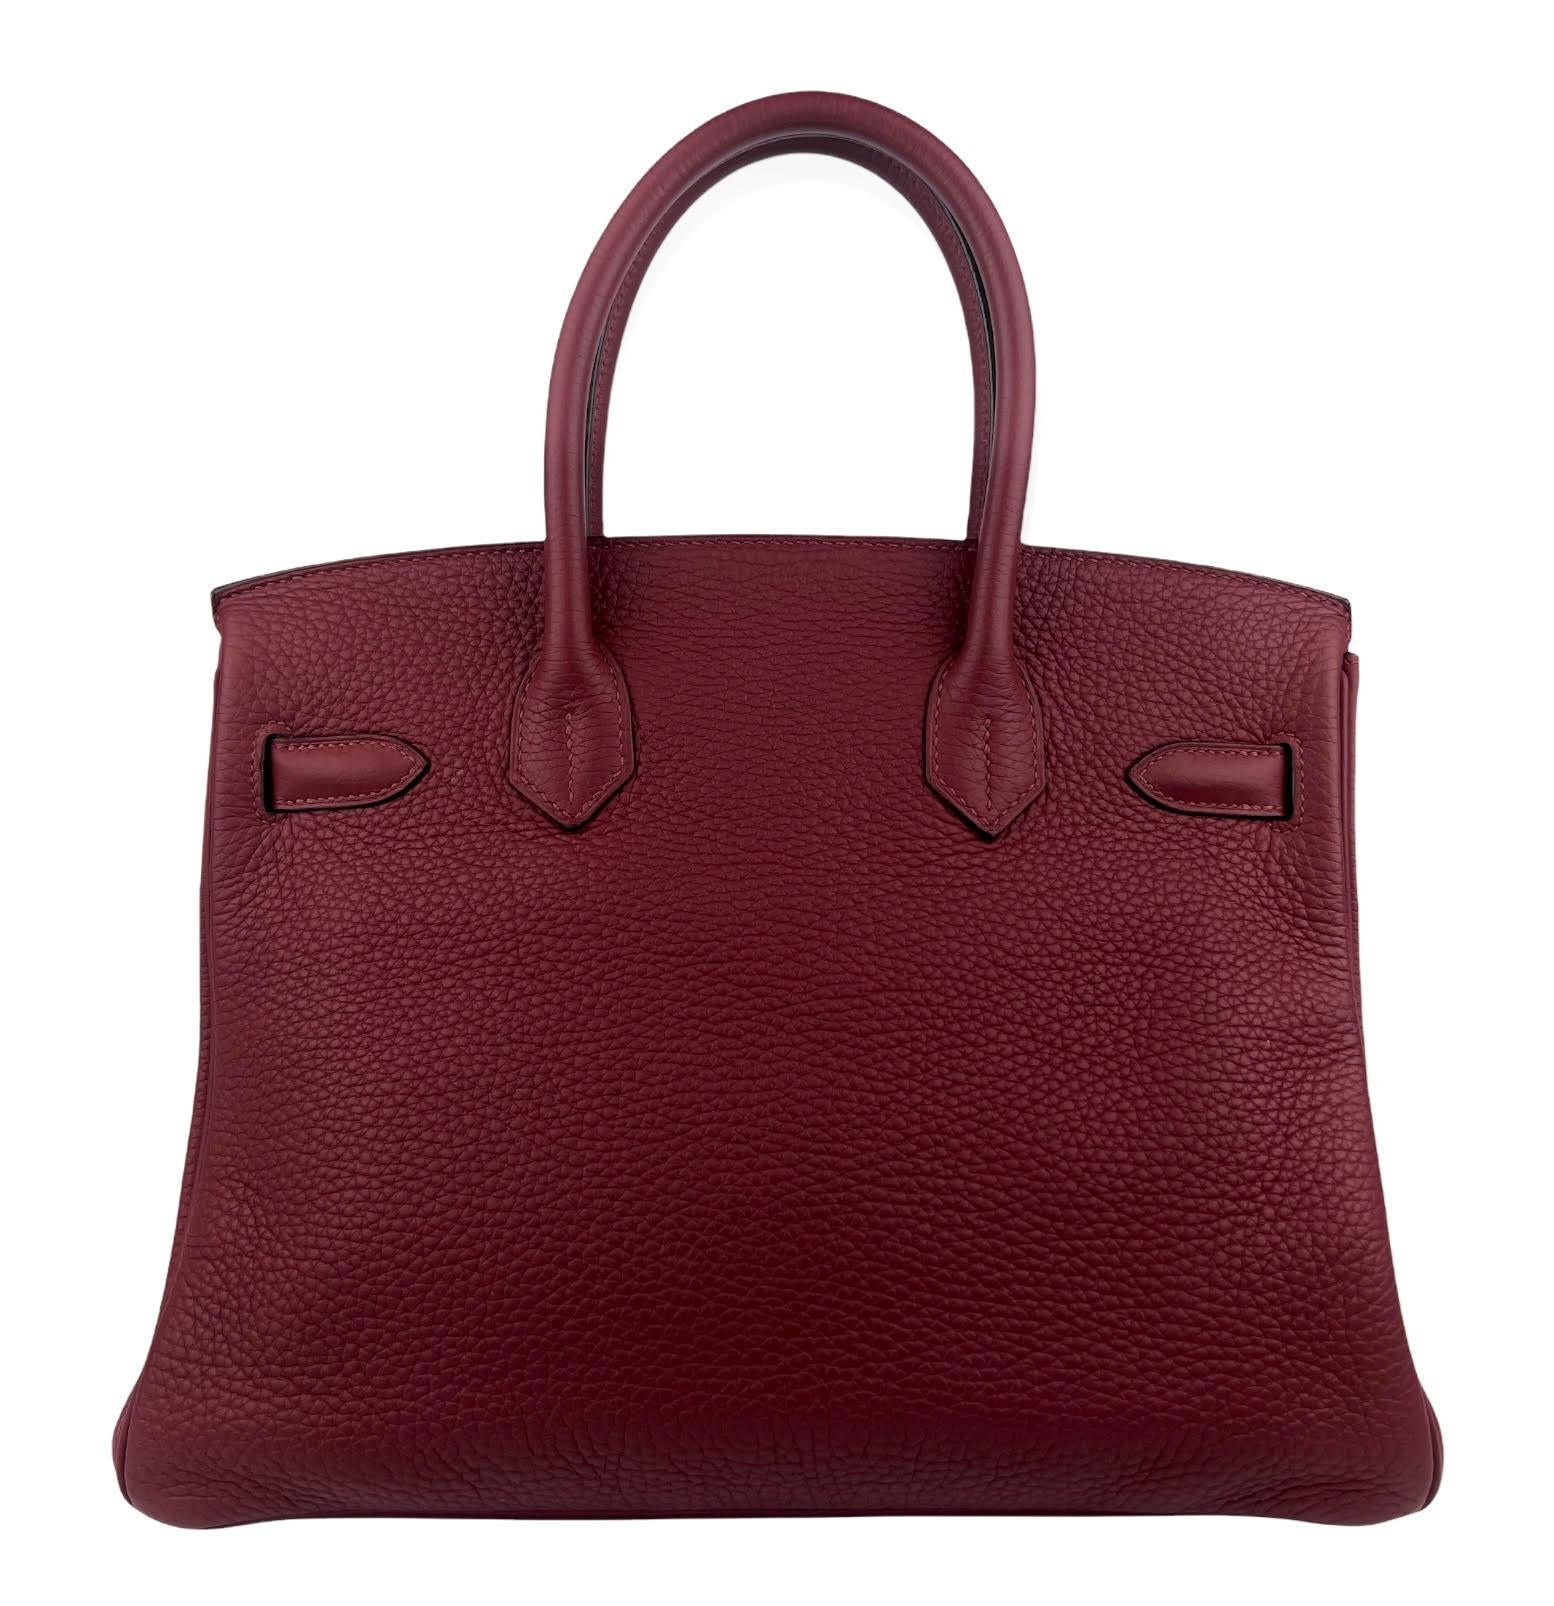 This authentic Hermès Garnet Red Clemence 30 cm Birkin is in pristine unworn condition with the protective plastic intact on the gold hardware.  Hermès bags are considered the ultimate luxury item the world over.  Hand stitched by skilled craftsmen,